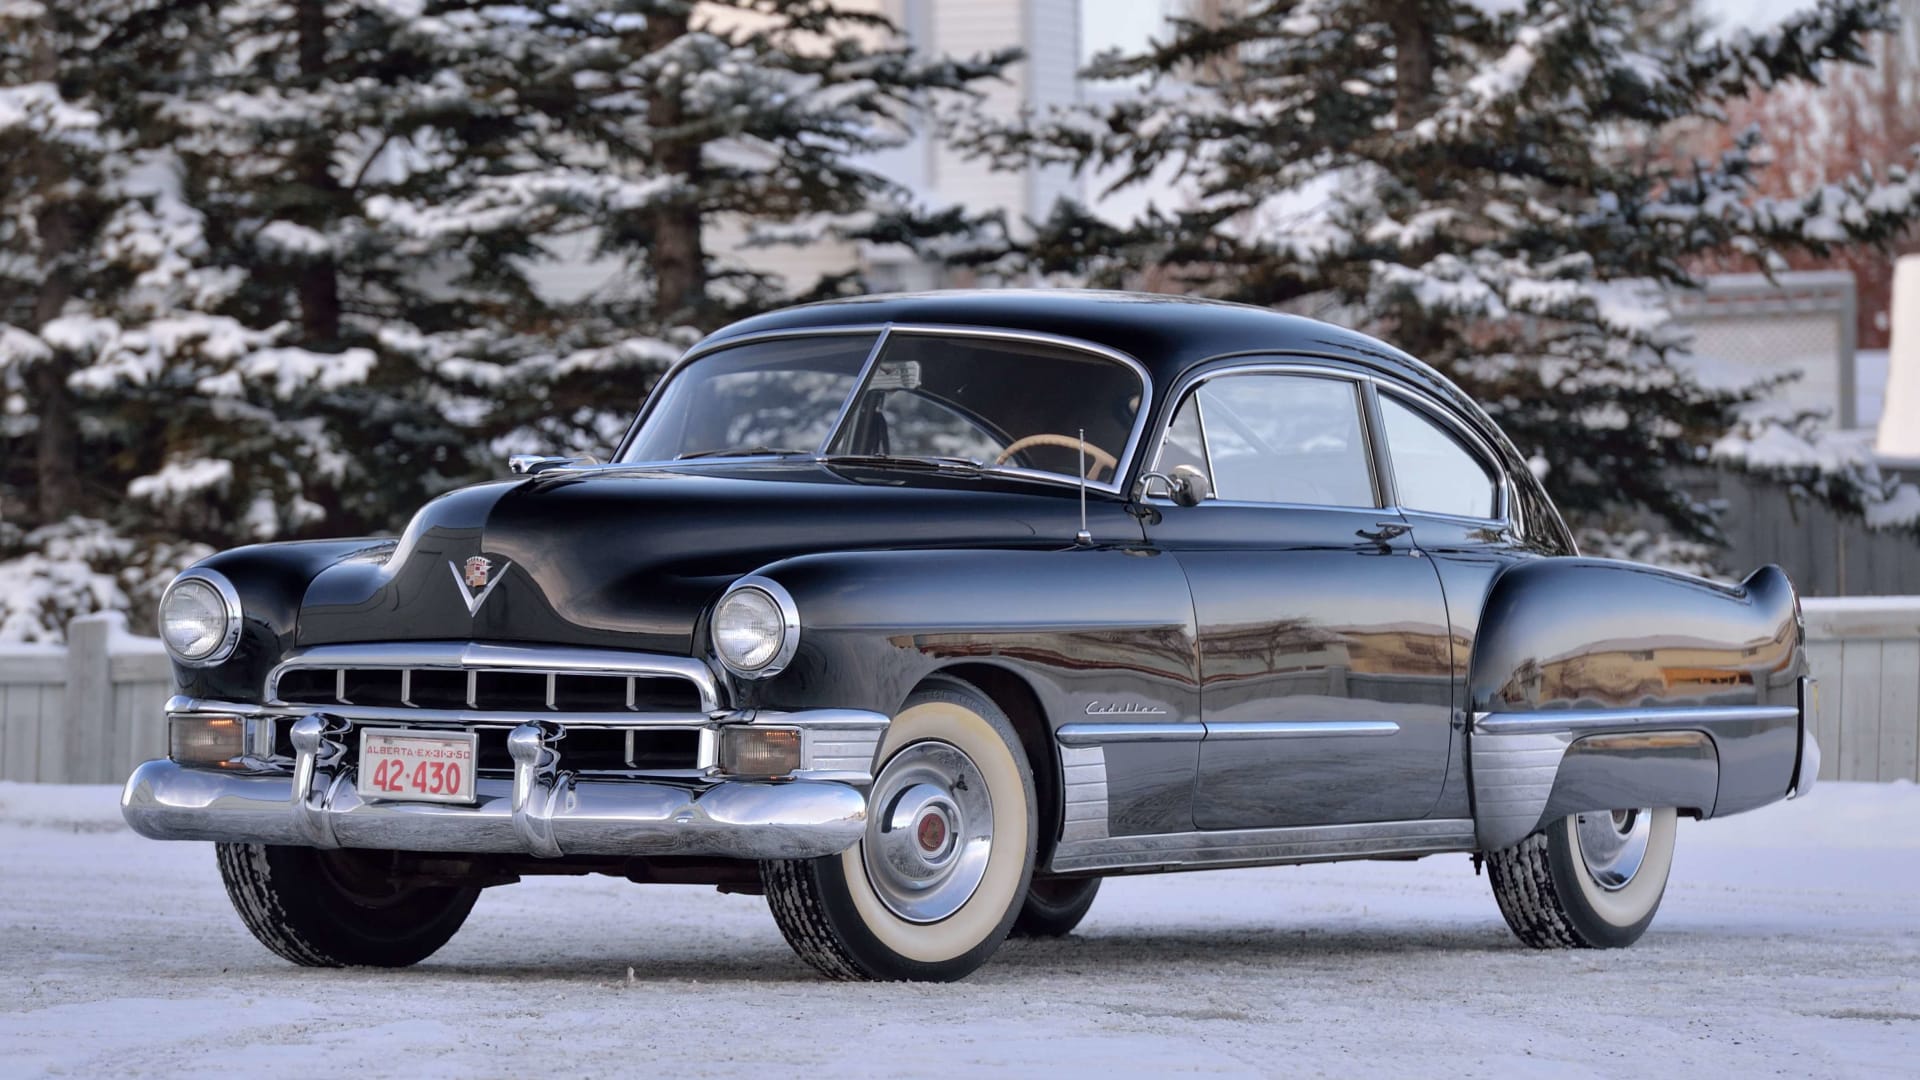 Classic Luxury Cars History, Features, and Where to Find Them